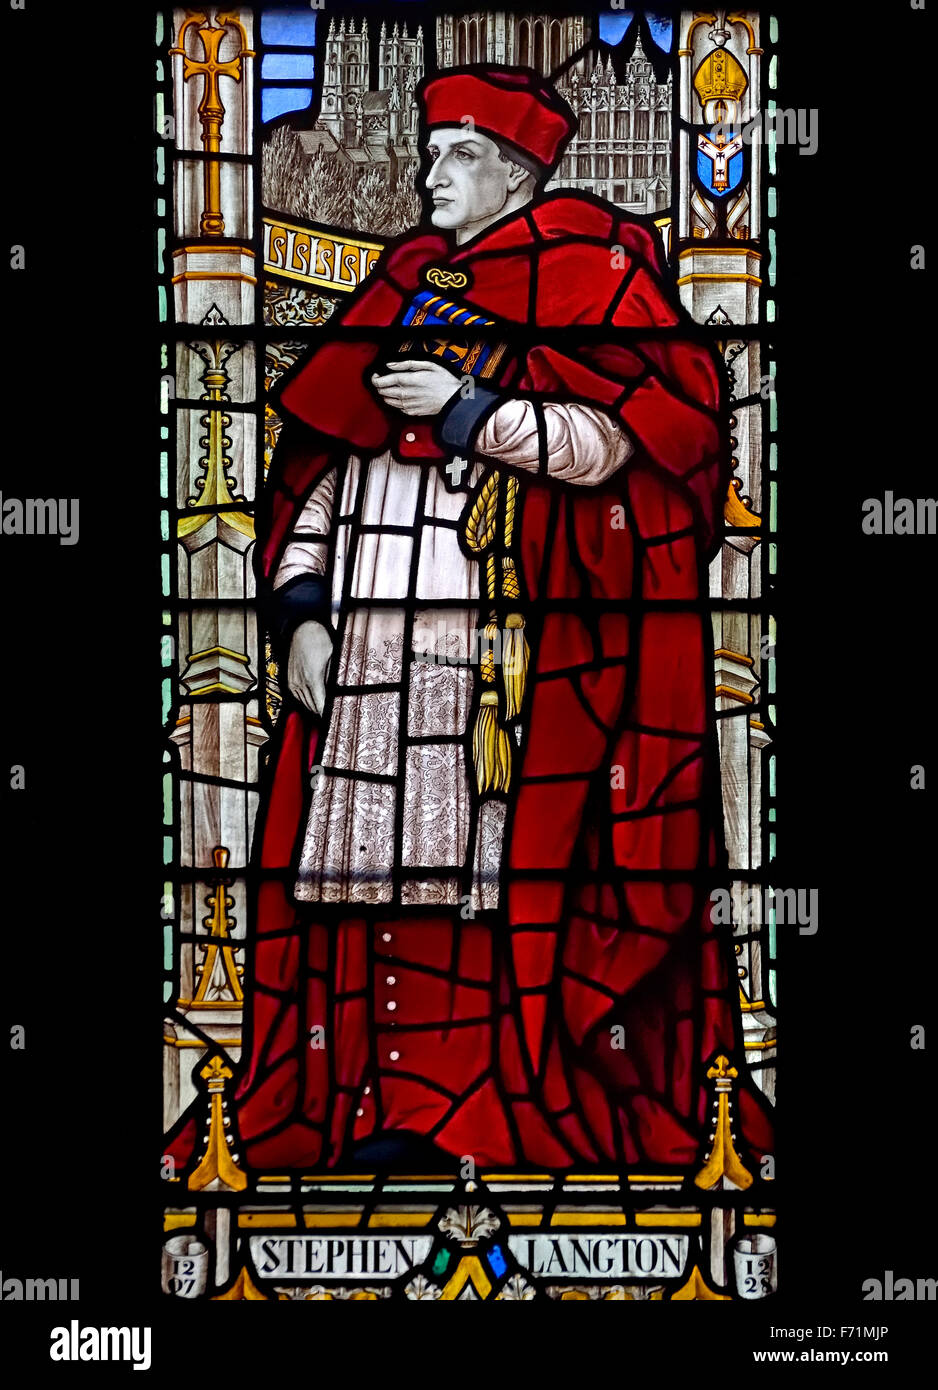 London, England, UK. Guild Church of St Dunstan in the West, Fleet Street. Stained Glass Window: Stephen Langton (1150-1228)... Stock Photo